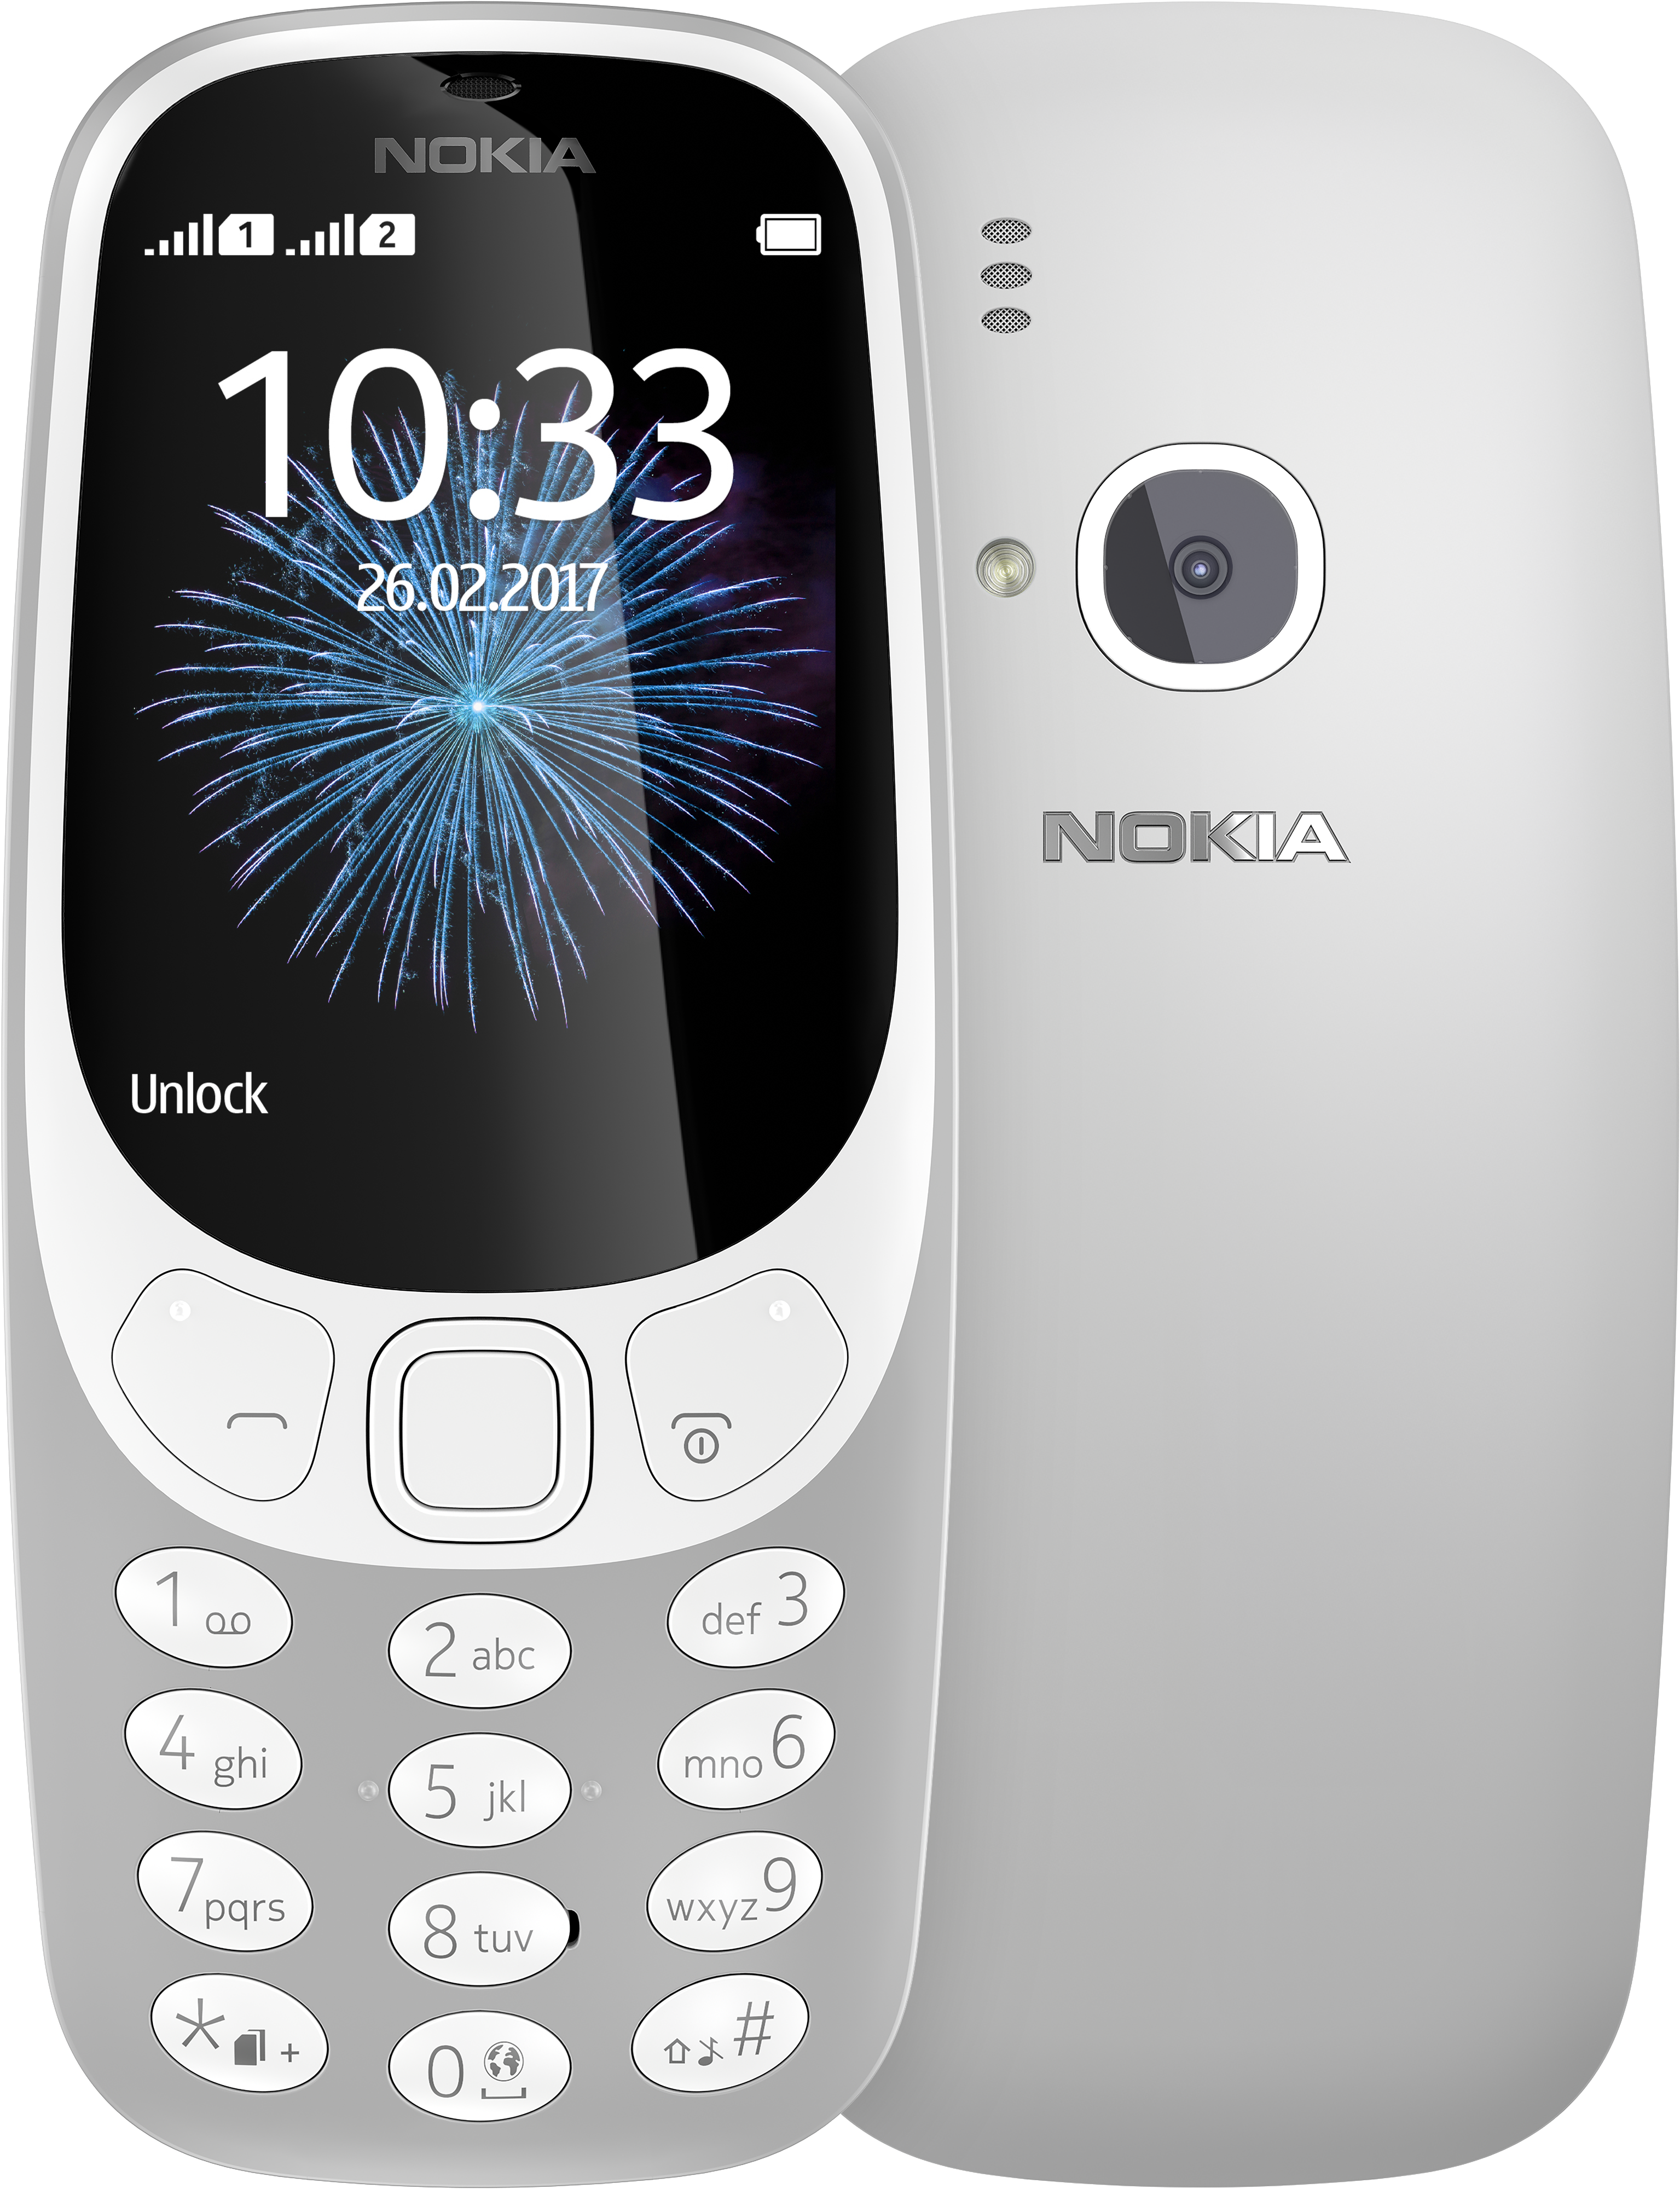 Nokia 3310 Navy blue Unlocked 2G GSM 900/1800 Mobile Phone - with